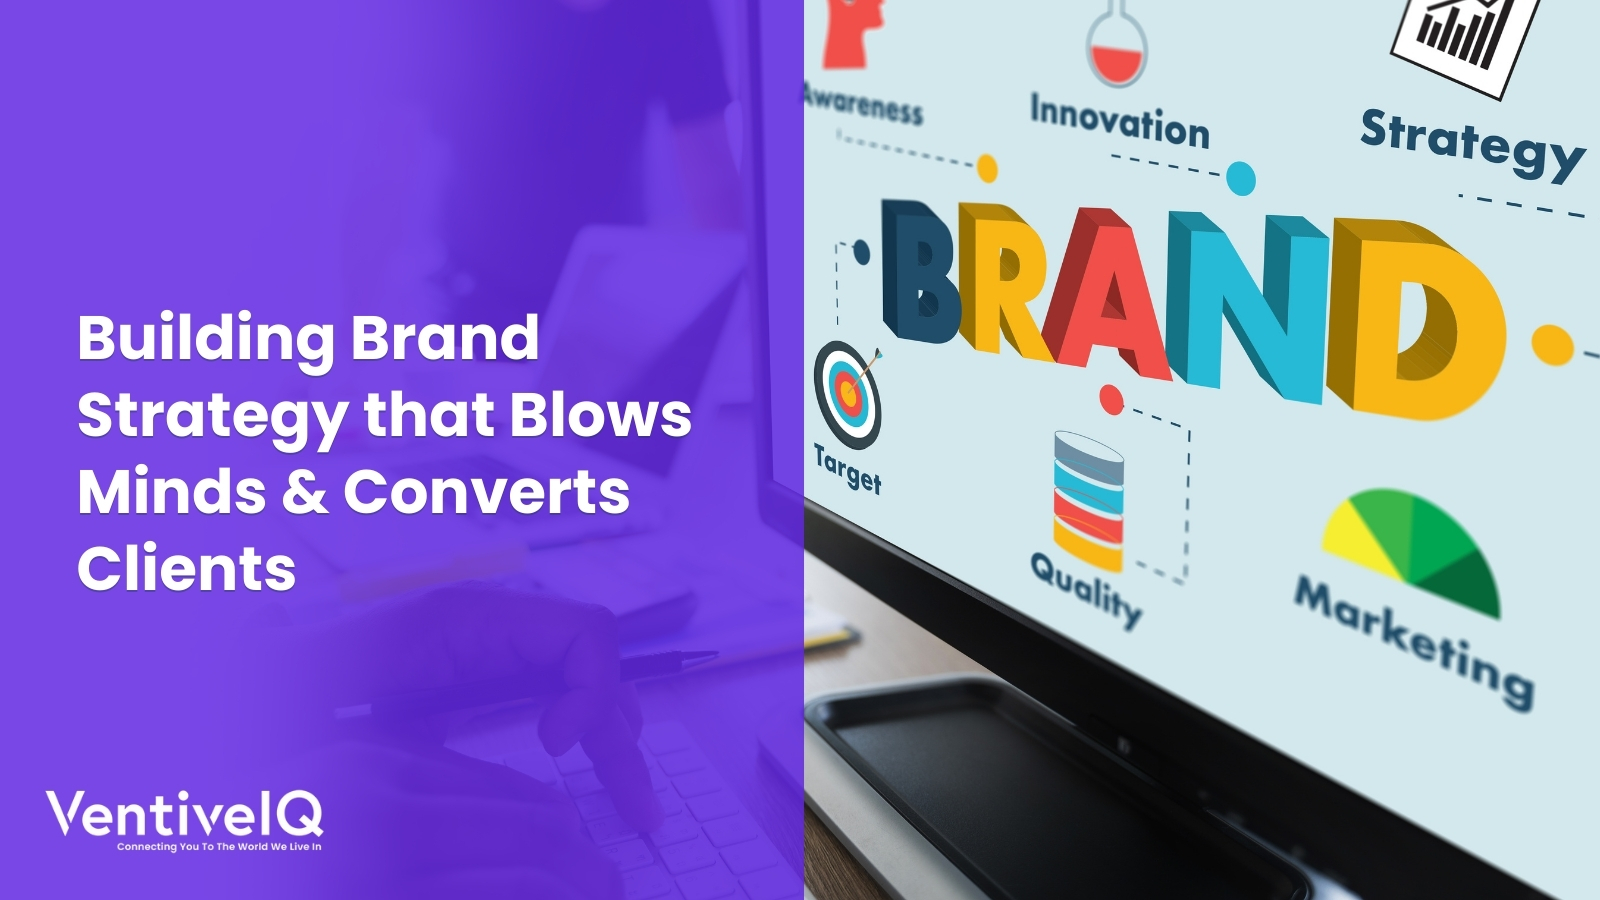 Building Brand Strategy that Blows Minds & Converts Clients